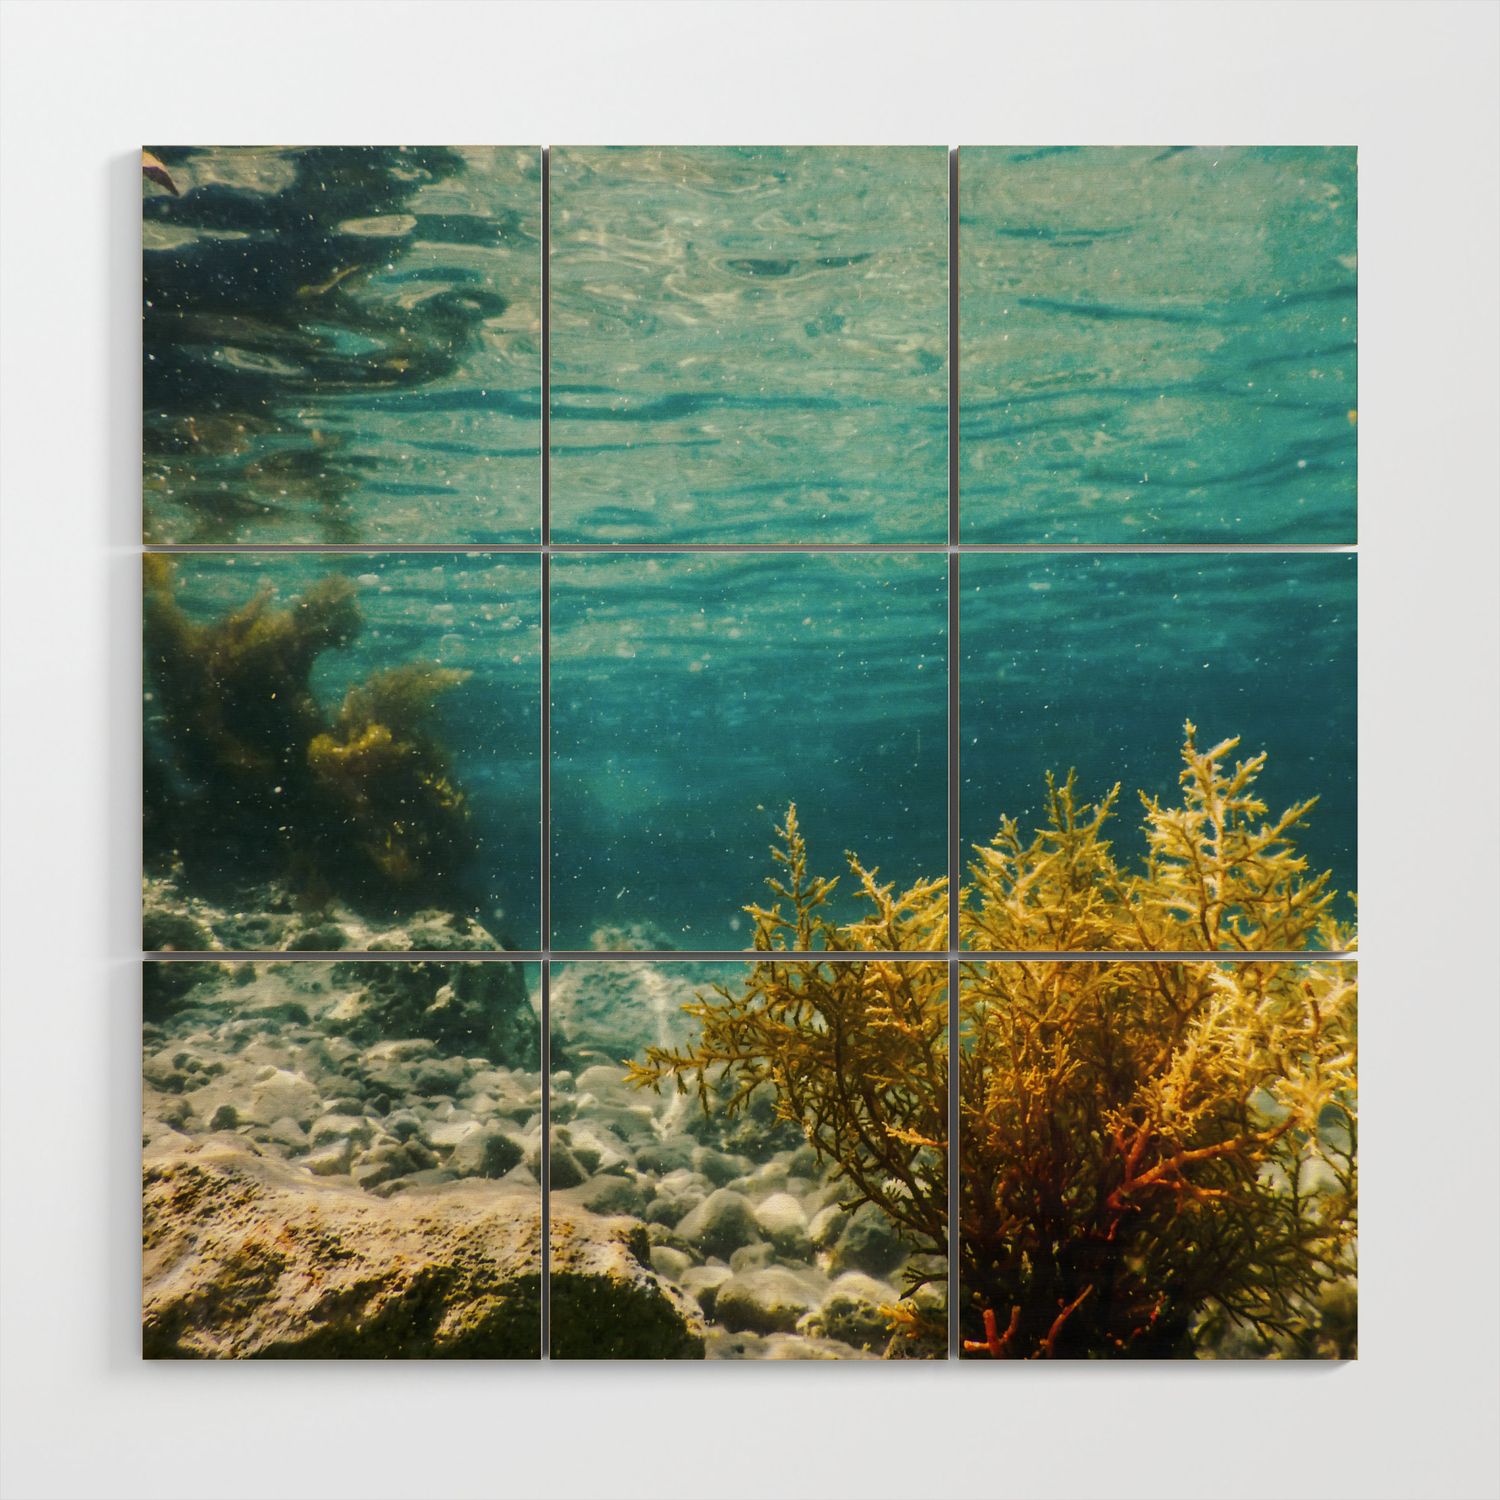 Forest Of Seaweed, Seaweed Underwater, Seaweed Shallow Water Near Surface Wood  Wall Artallexxandarx | Society6 With Most Up To Date Underwater Wood Wall Art (View 13 of 20)